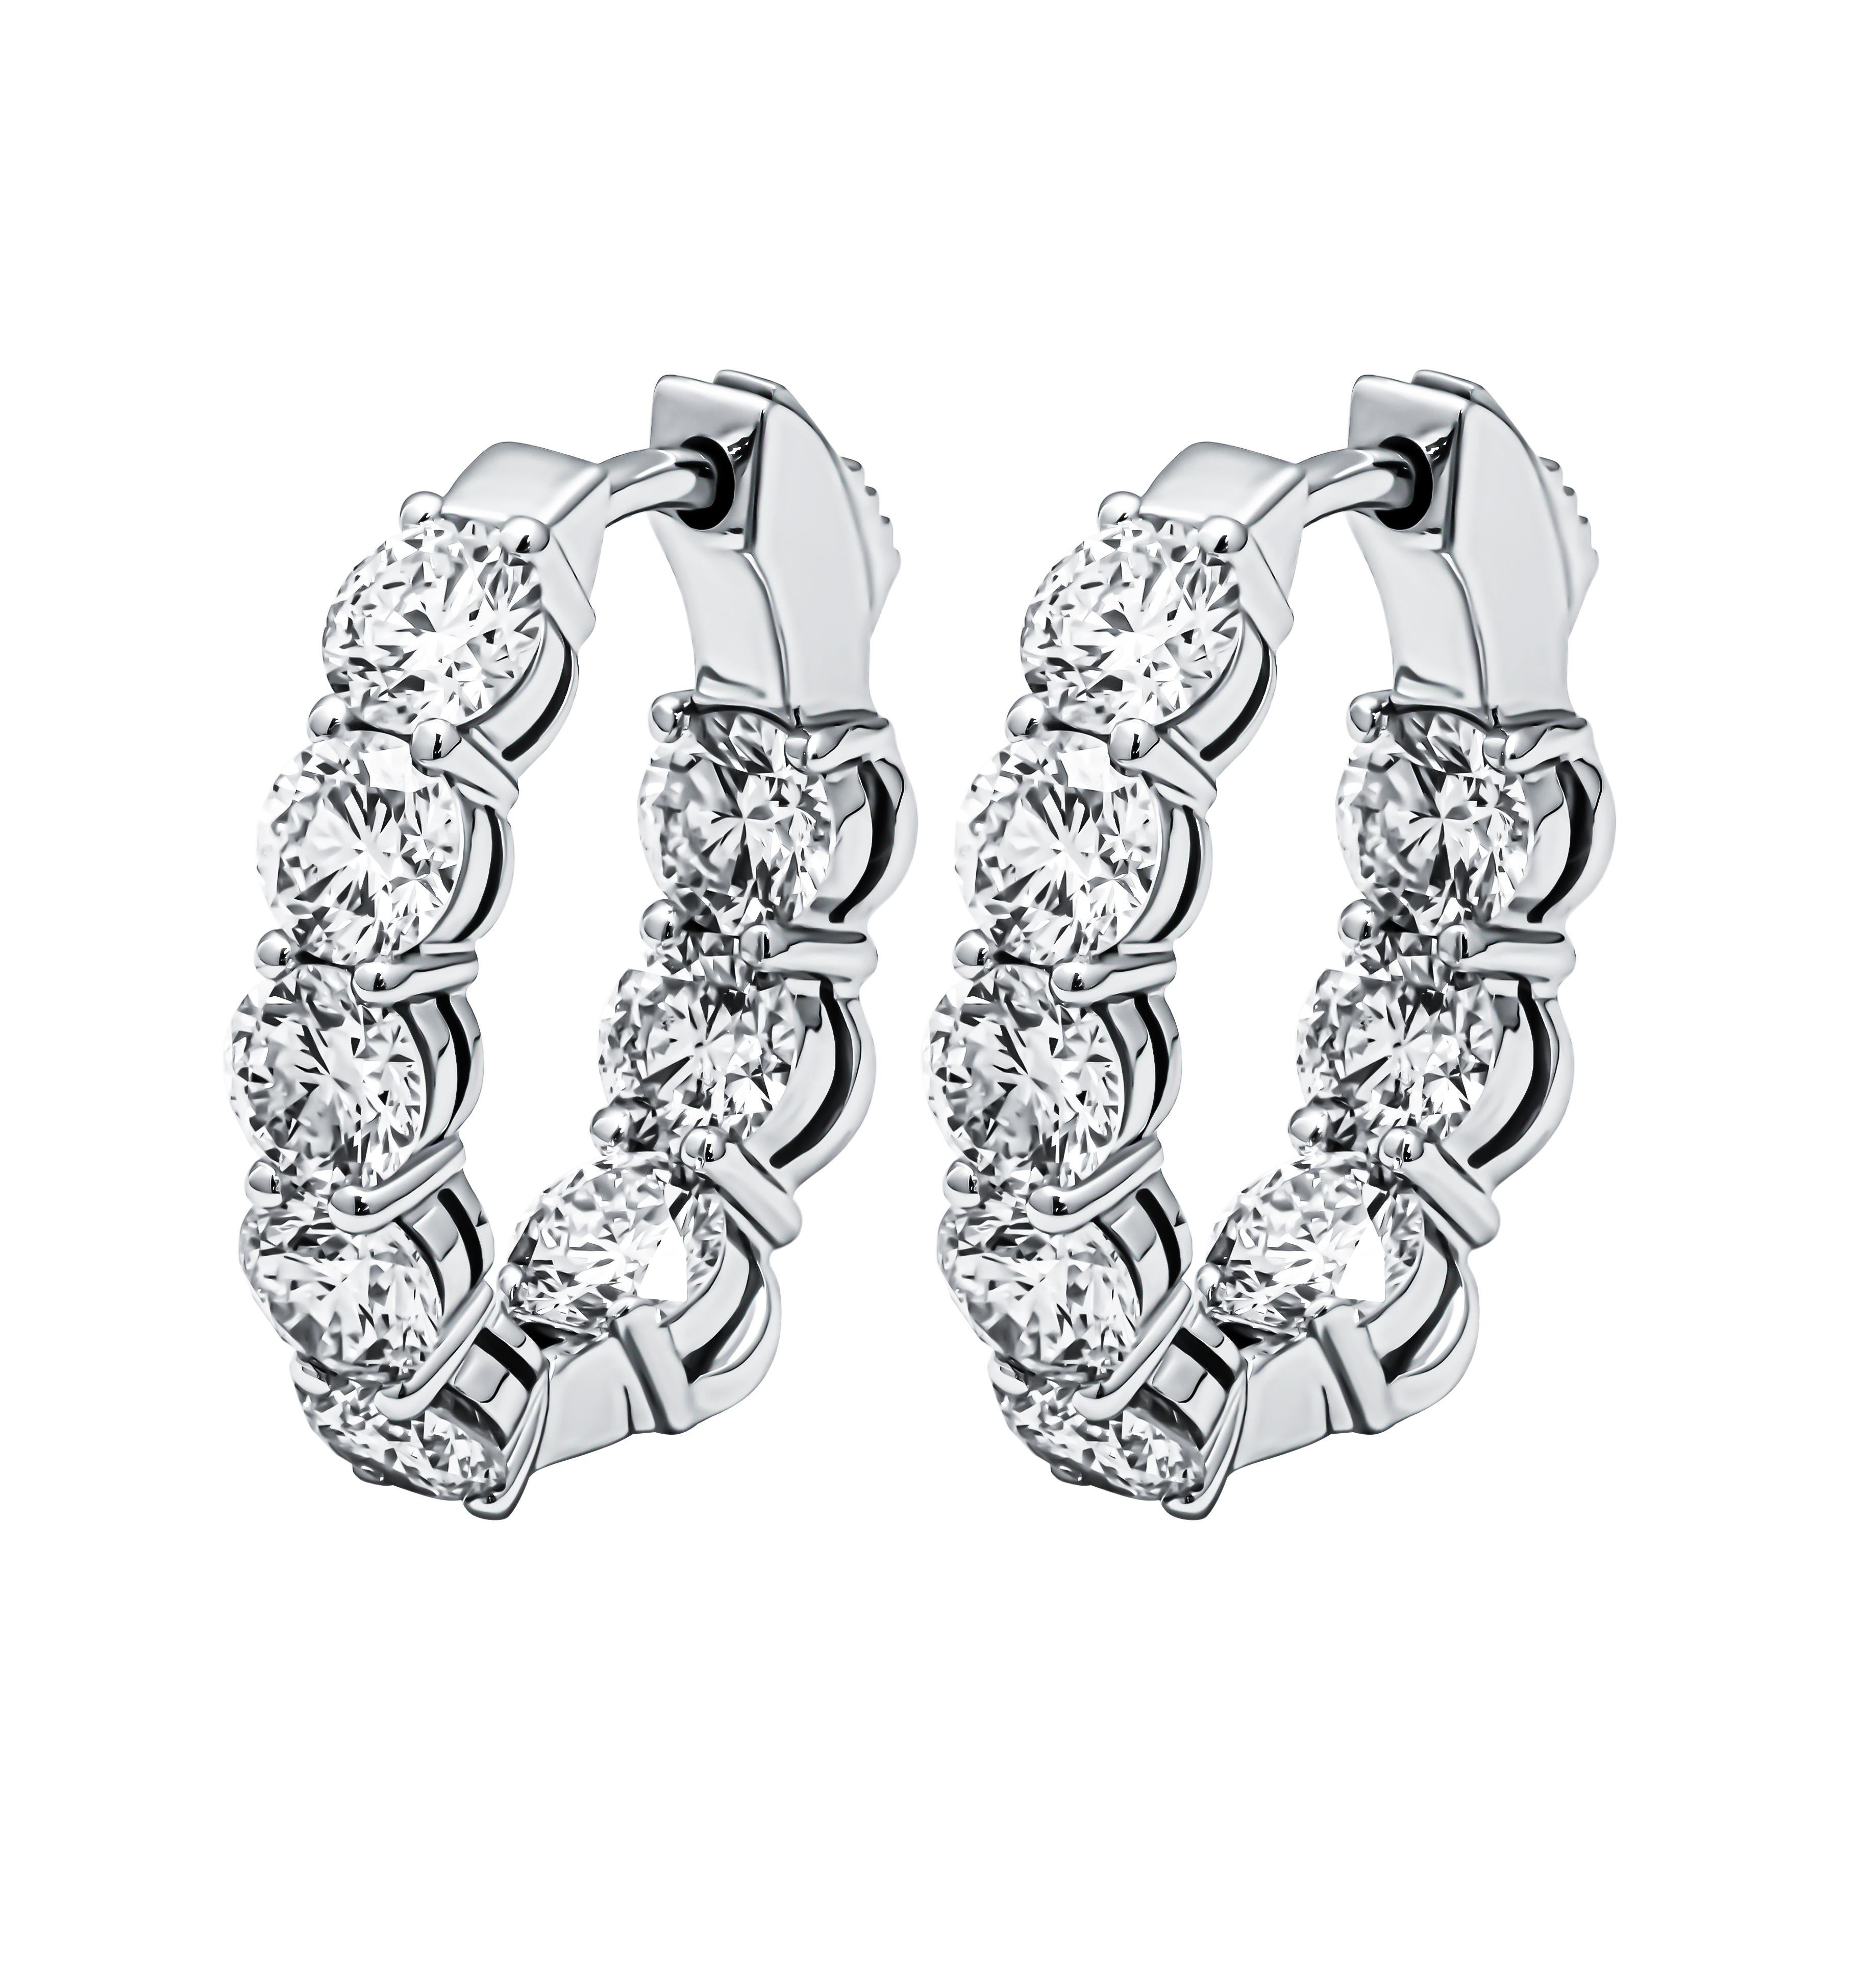 ndulge in timeless elegance with these exquisite 14K White Gold hoop earrings adorned with brilliant round diamonds, totaling an impressive 1.88 carats. Crafted to perfection, these earrings showcase the allure of high-quality diamonds boasting a